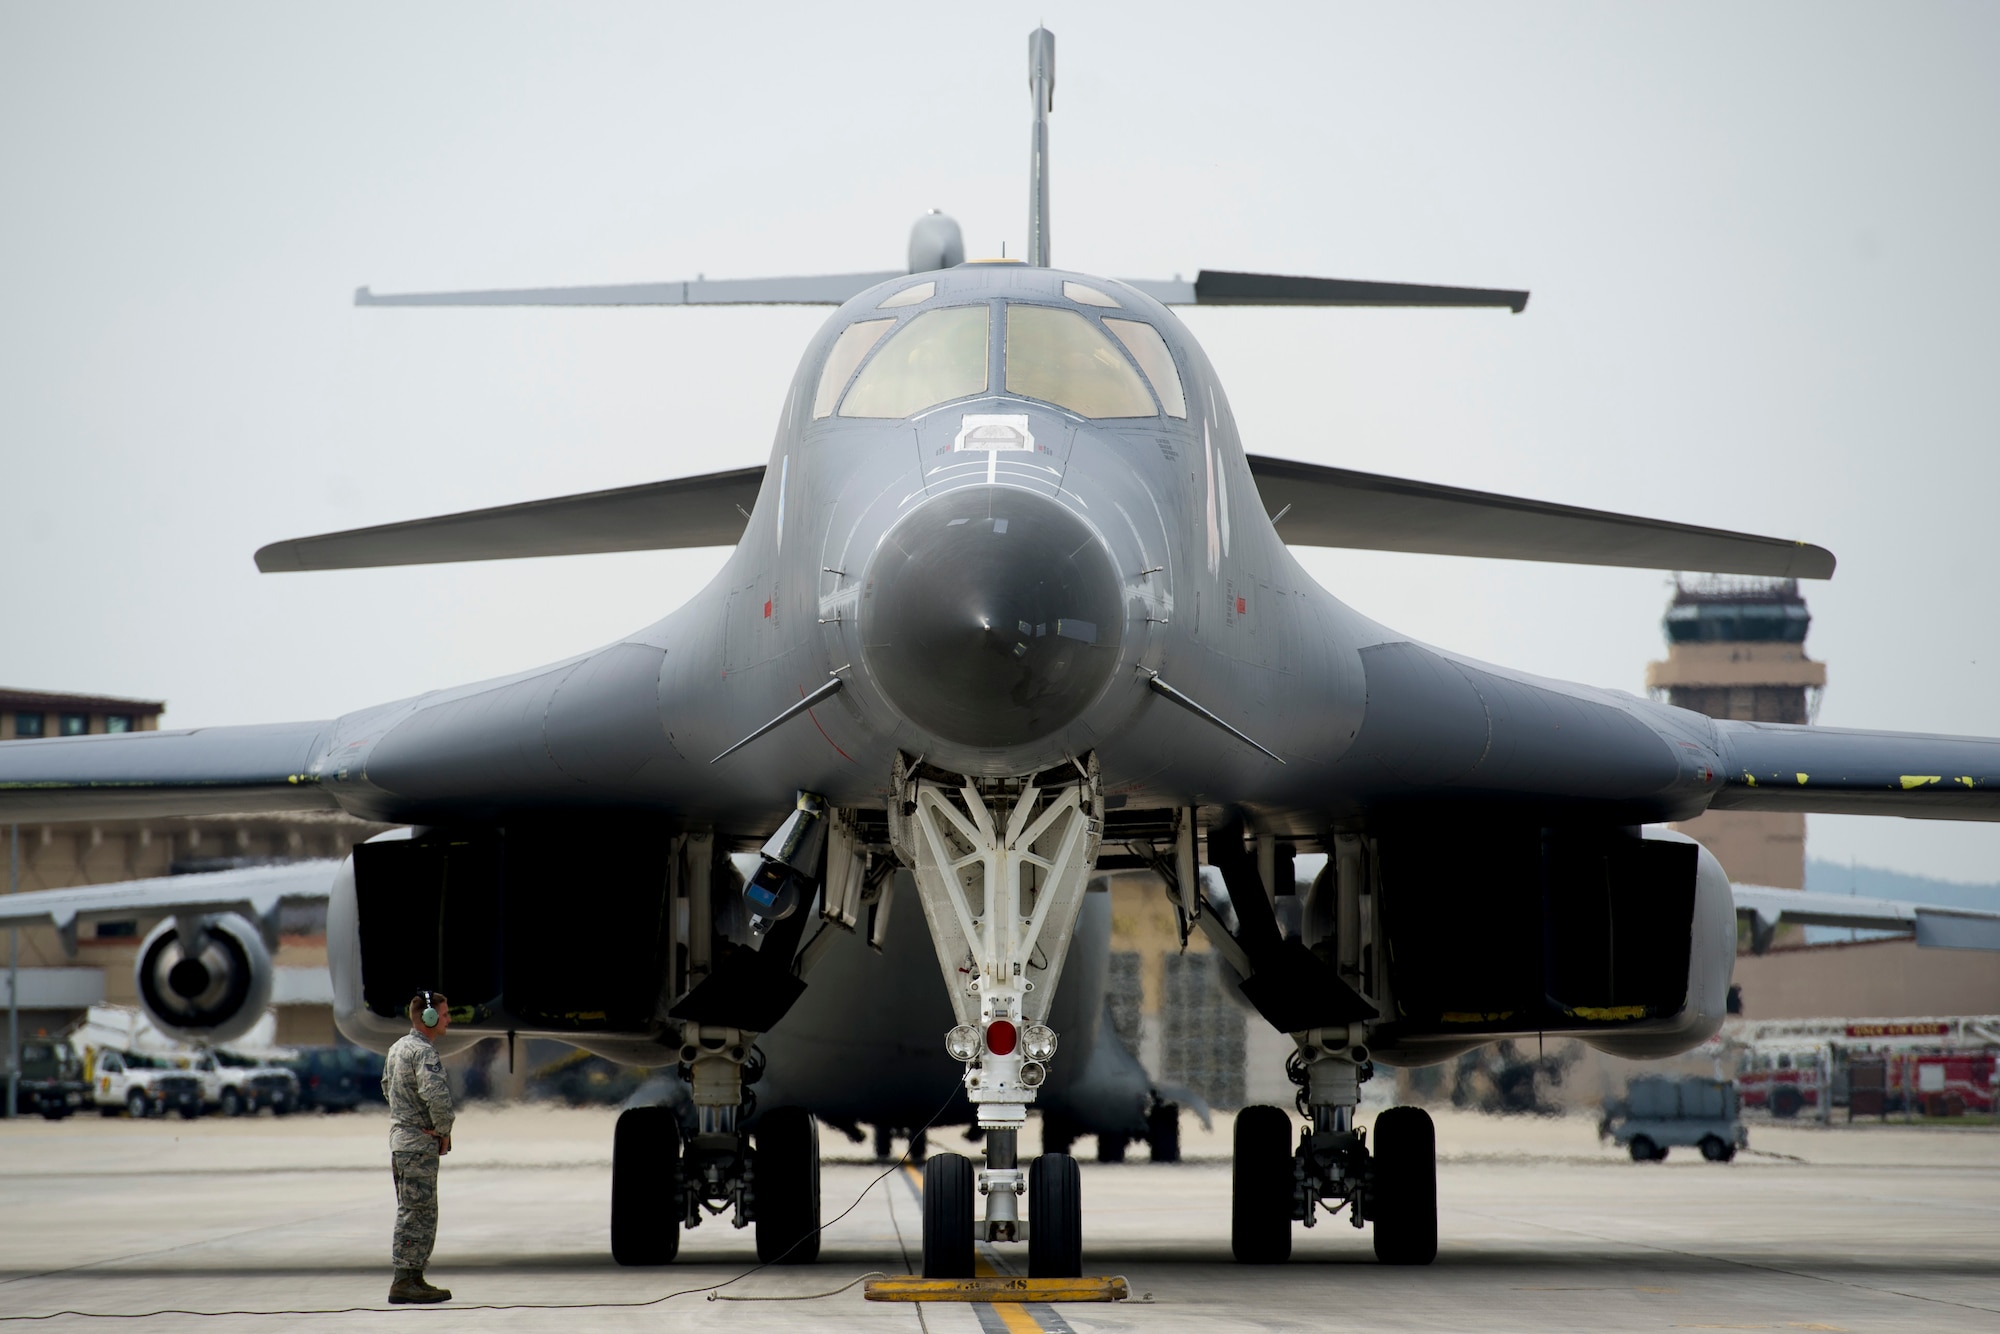 U.S. Air Force Staff Sgt. Cody Owens, 28th Aircraft Maintenance Squadron flight controls journeymen, awaits engine shut-down of a U.S. Air Force B-1B Lancer deployed from Andersen Air Base, Guam, at Osan Air Base, Republic of Korea, Sept. 21, 2016. Today, the Lancer conducted the closest flight to North Korea ever. The B-1 is the backbone of the U.S. long-range bomber mission and is capable of carrying the largest payload of both guided and unguided weapons in the Air Force inventory. (U.S. Air Force photo by Staff Sgt. Jonathan Steffen)